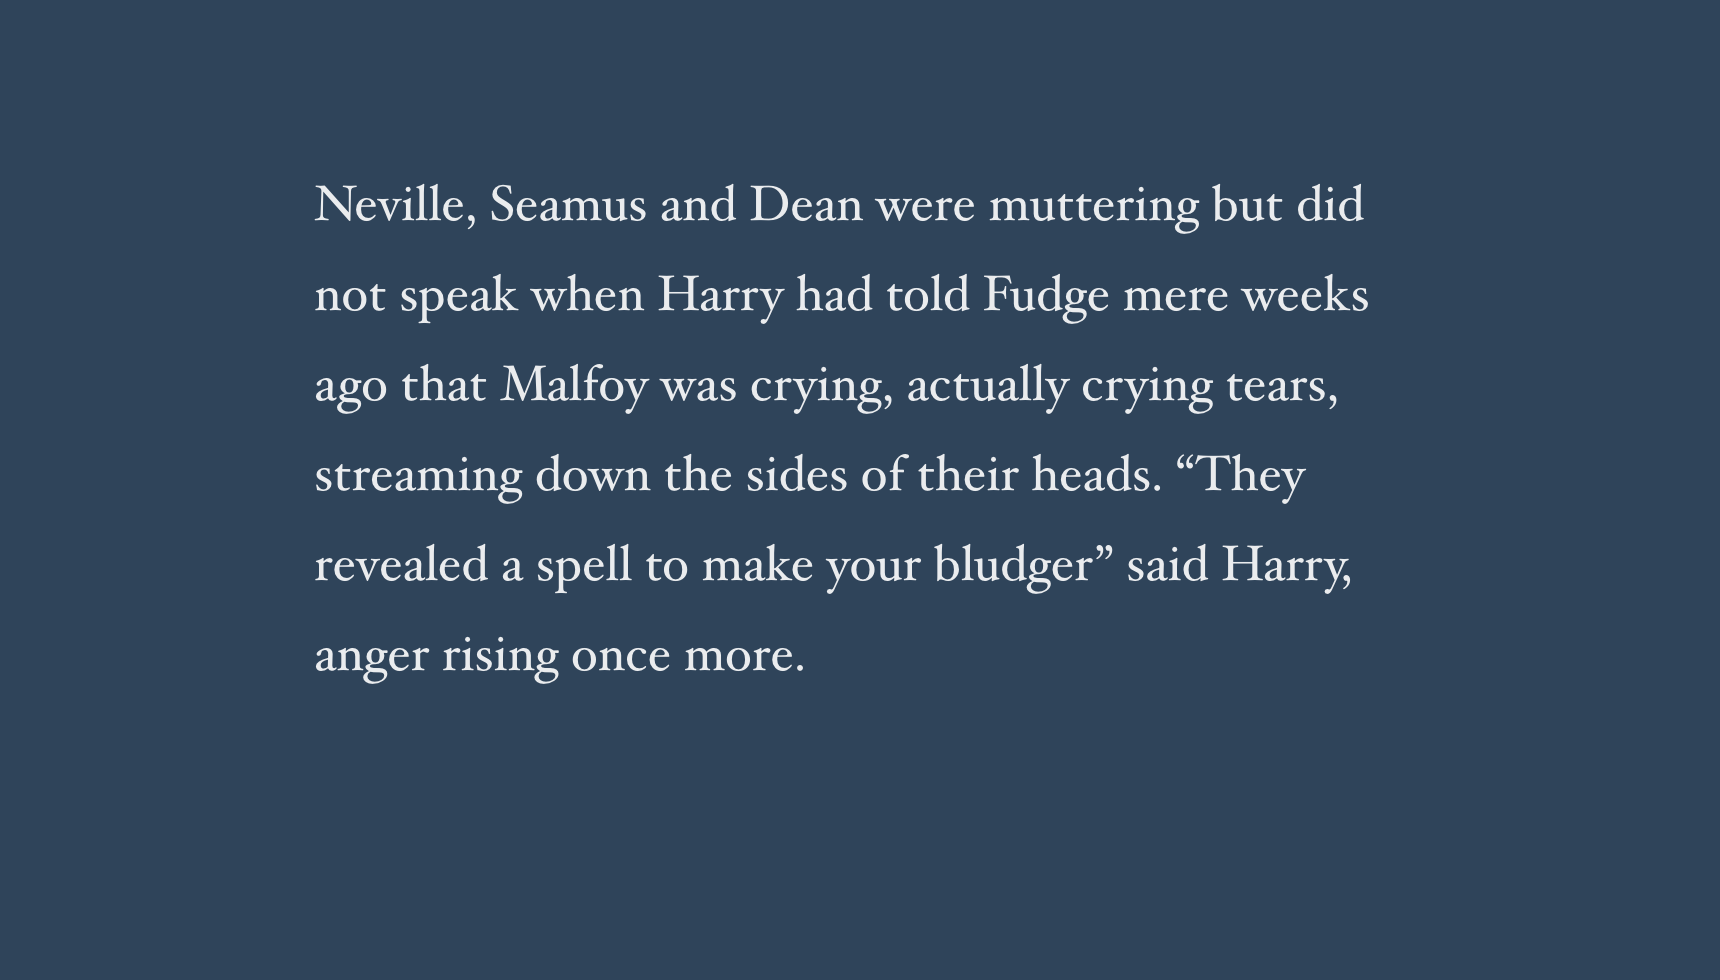 Neville, Seamus and Dean were muttering but did not speak when Harry had told Fudge mere weeks ago that Malfoy was crying, actually crying tears, streaming down the sides of their heads. “They revealed a spell to make your bludger” said Harry, anger rising once more.